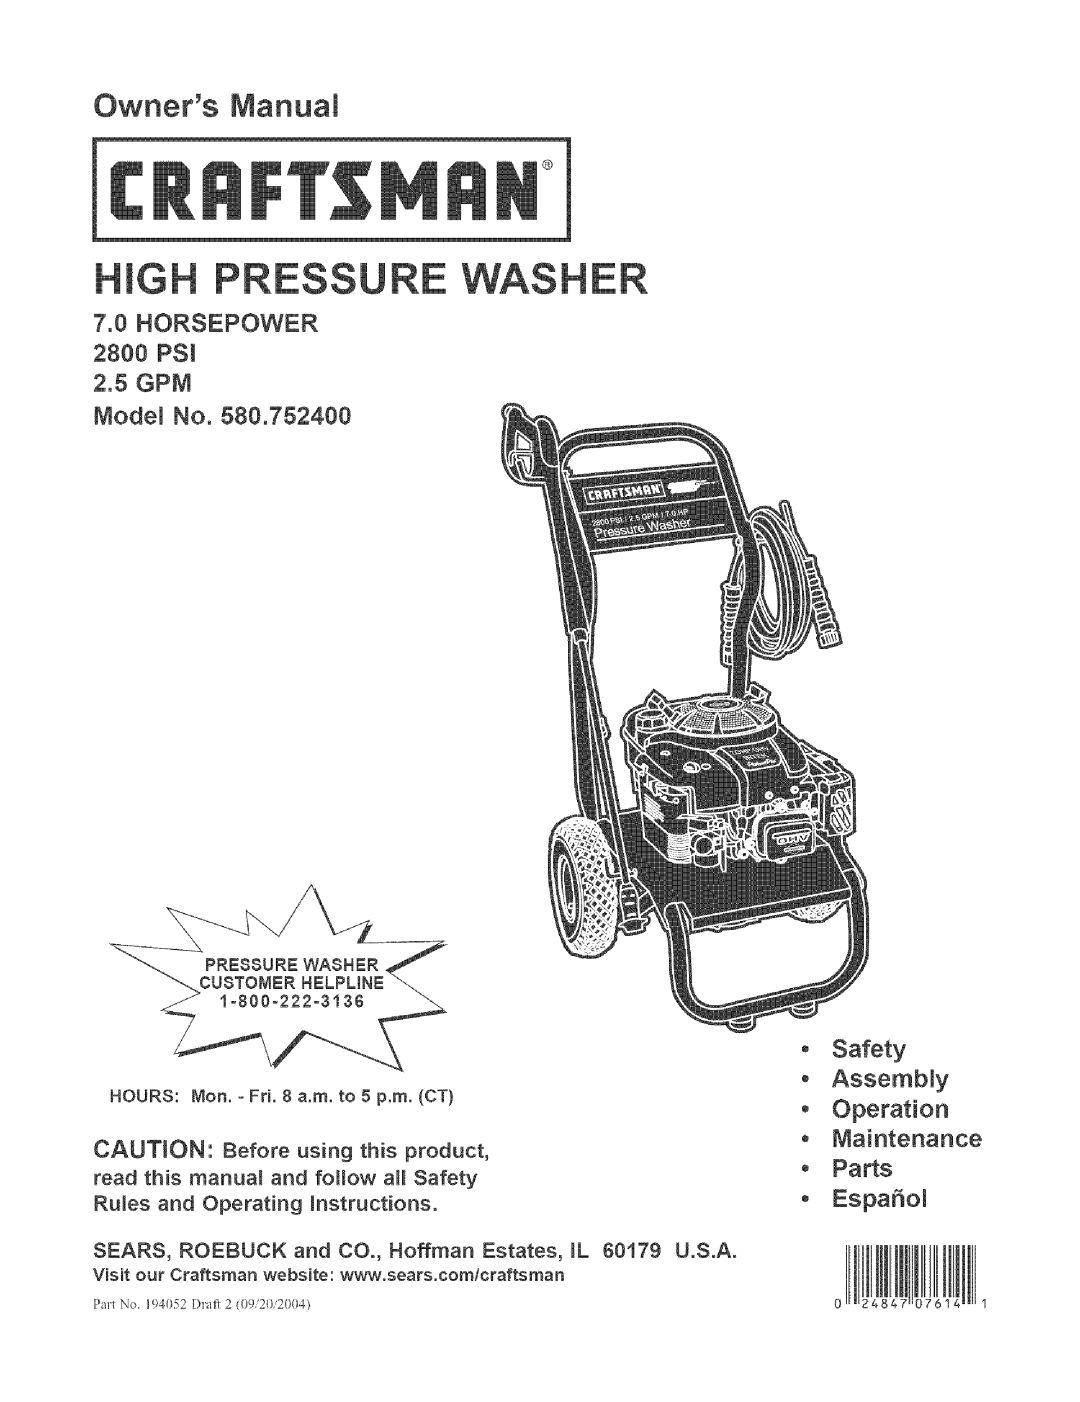 Craftsman 580.7524 owner manual 7.0HORSEPOWER 2800 PSI 2.5GPM Model No, o Safety o Assembly o Operation 